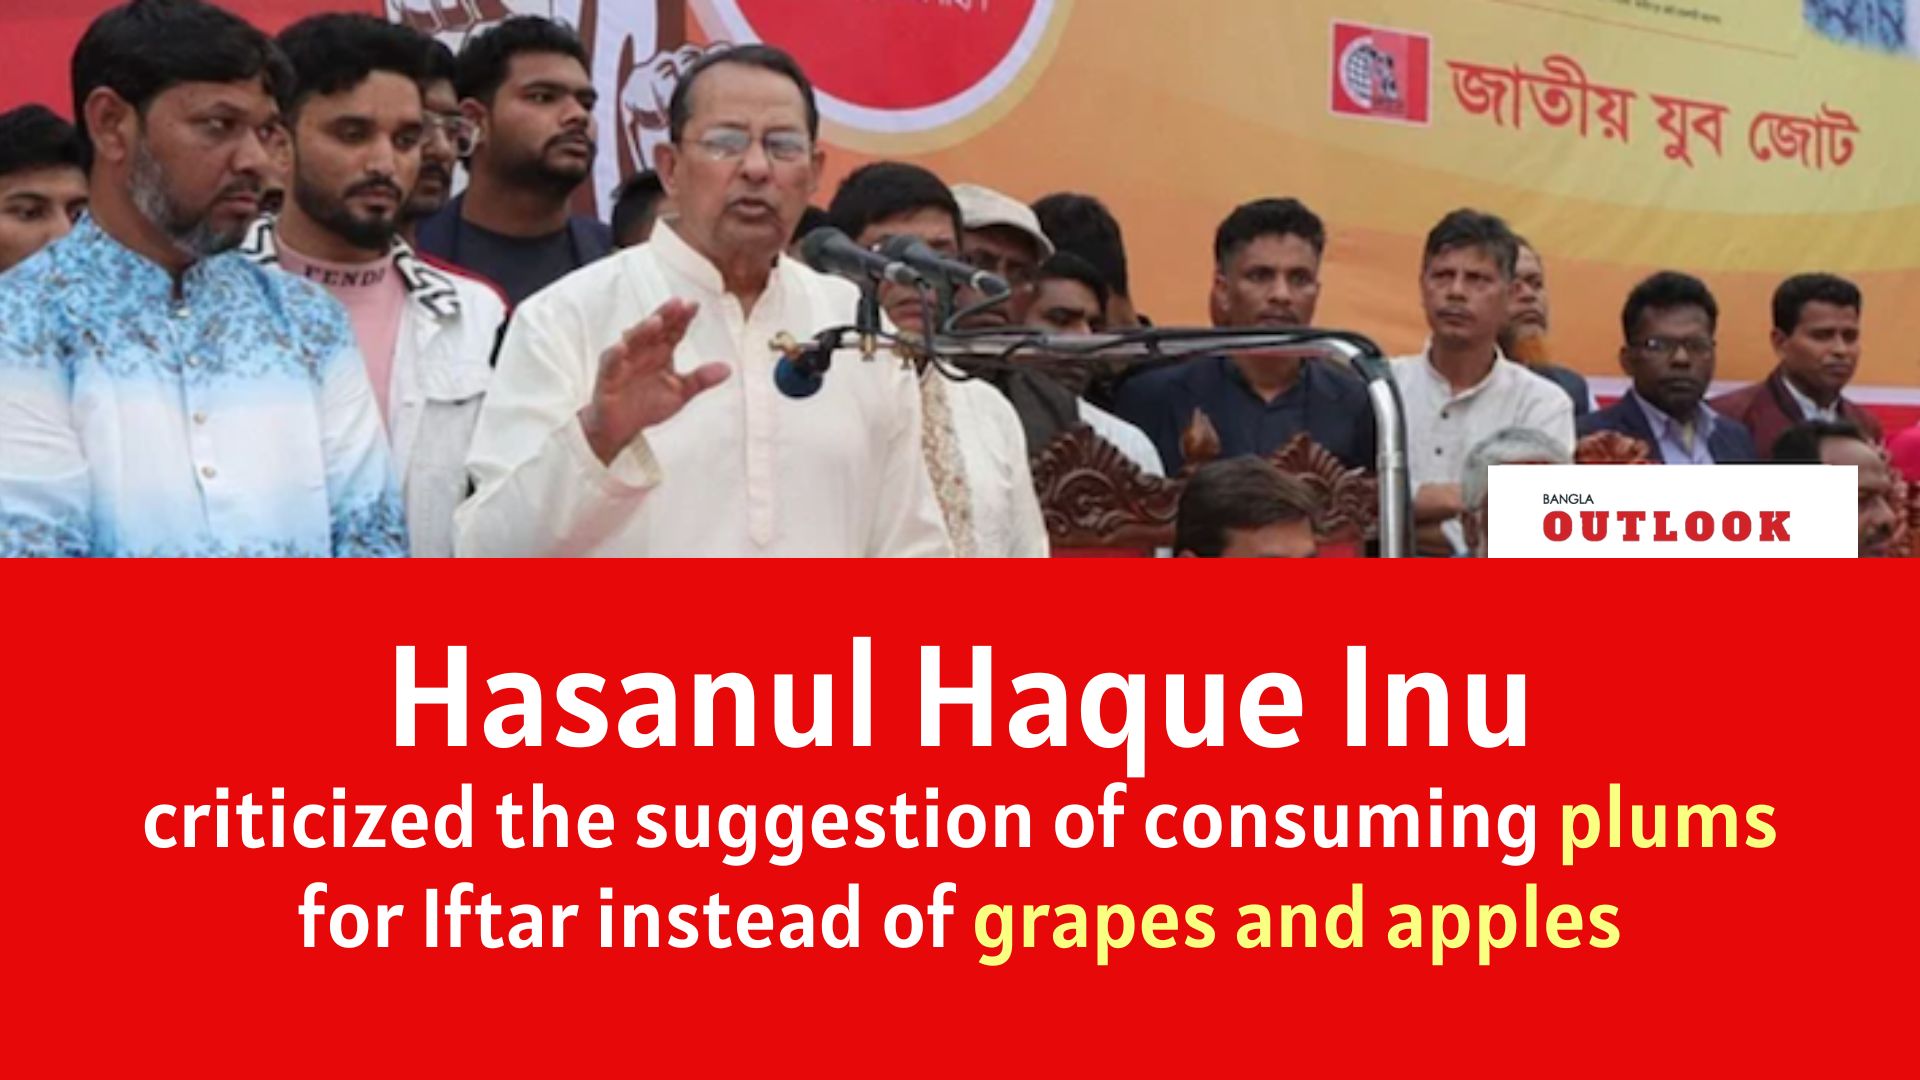 Ginie of price hike lies within the government: Hasanul Haque Inu